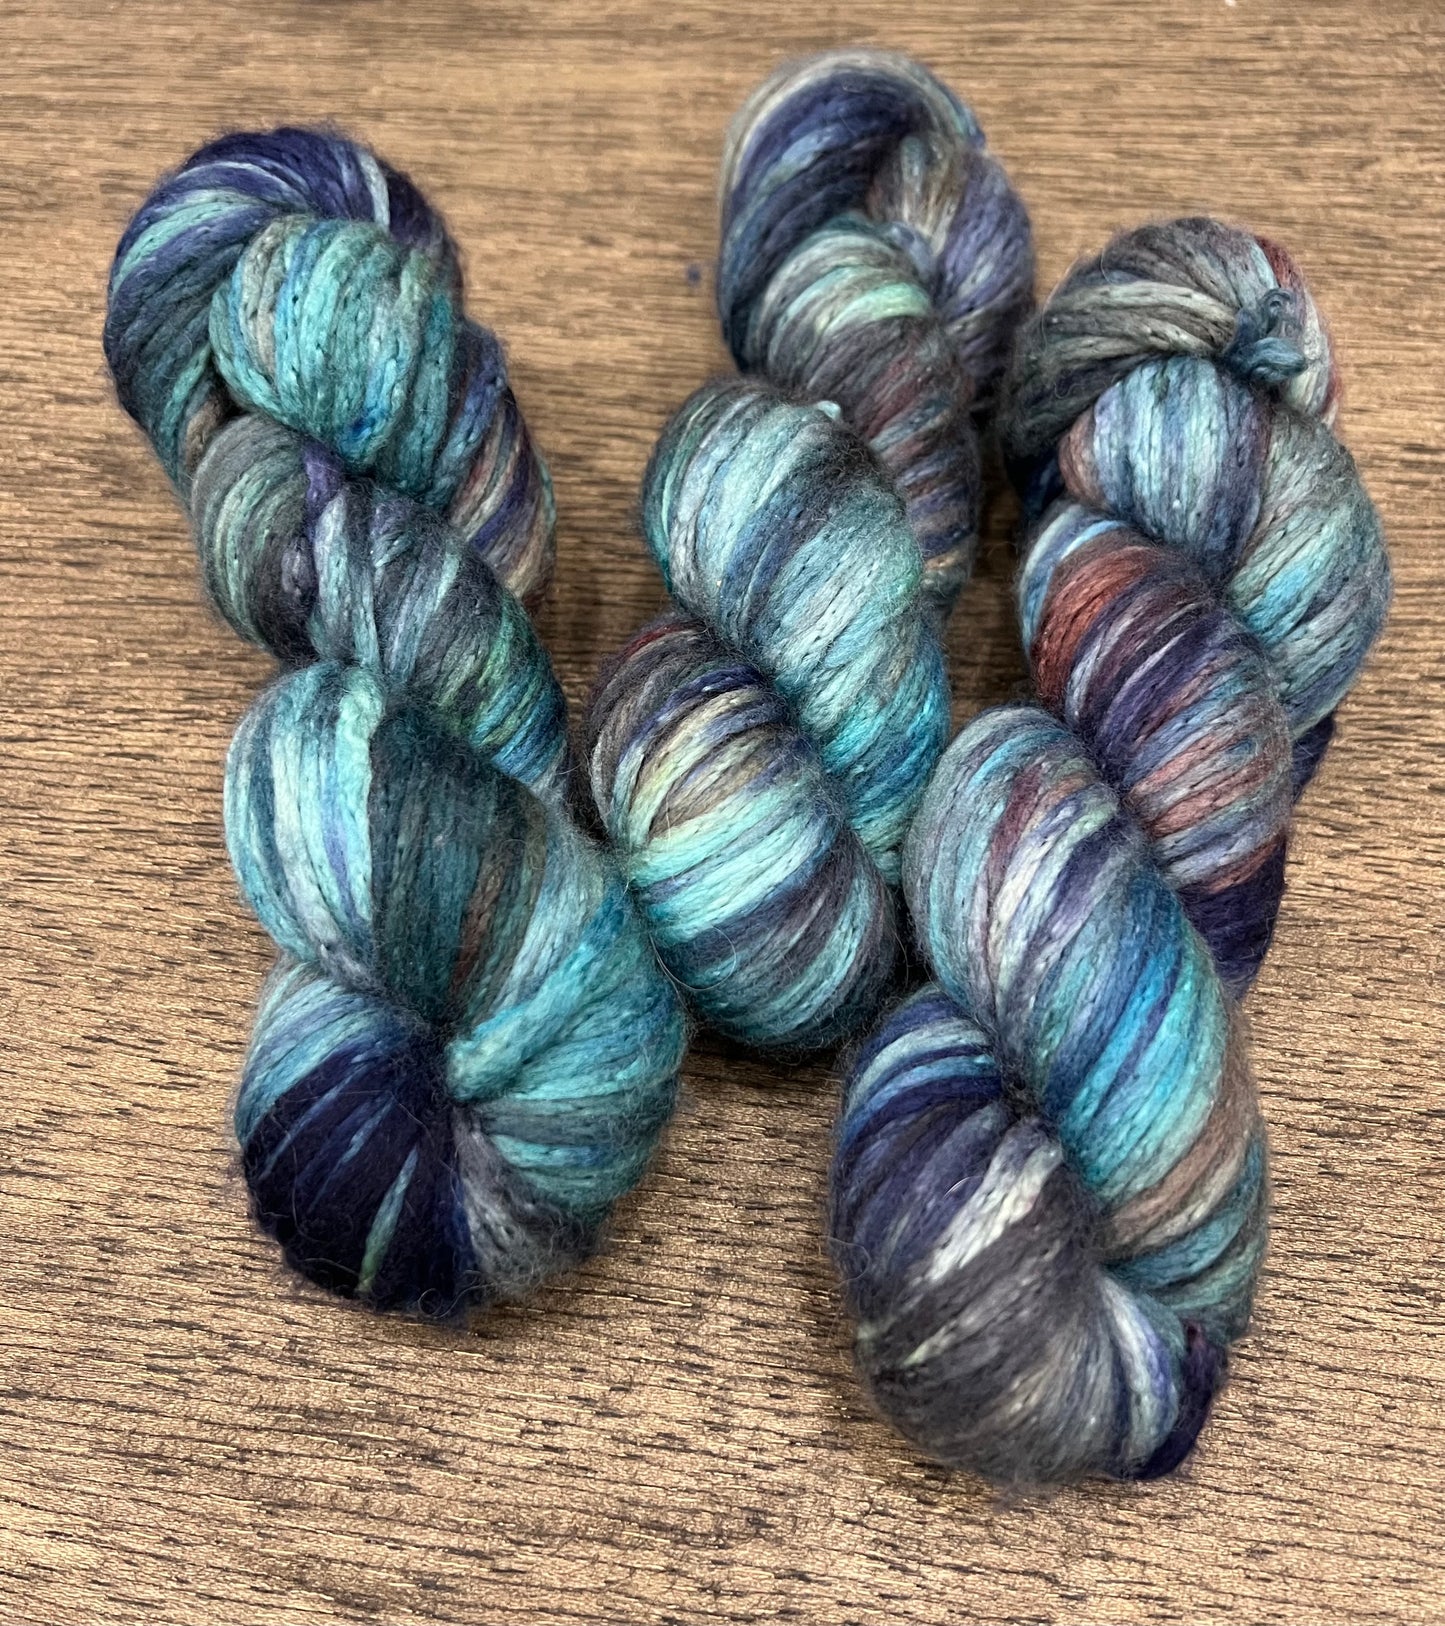 OOAK #23 - Muted Variegated Super Bulky 100g